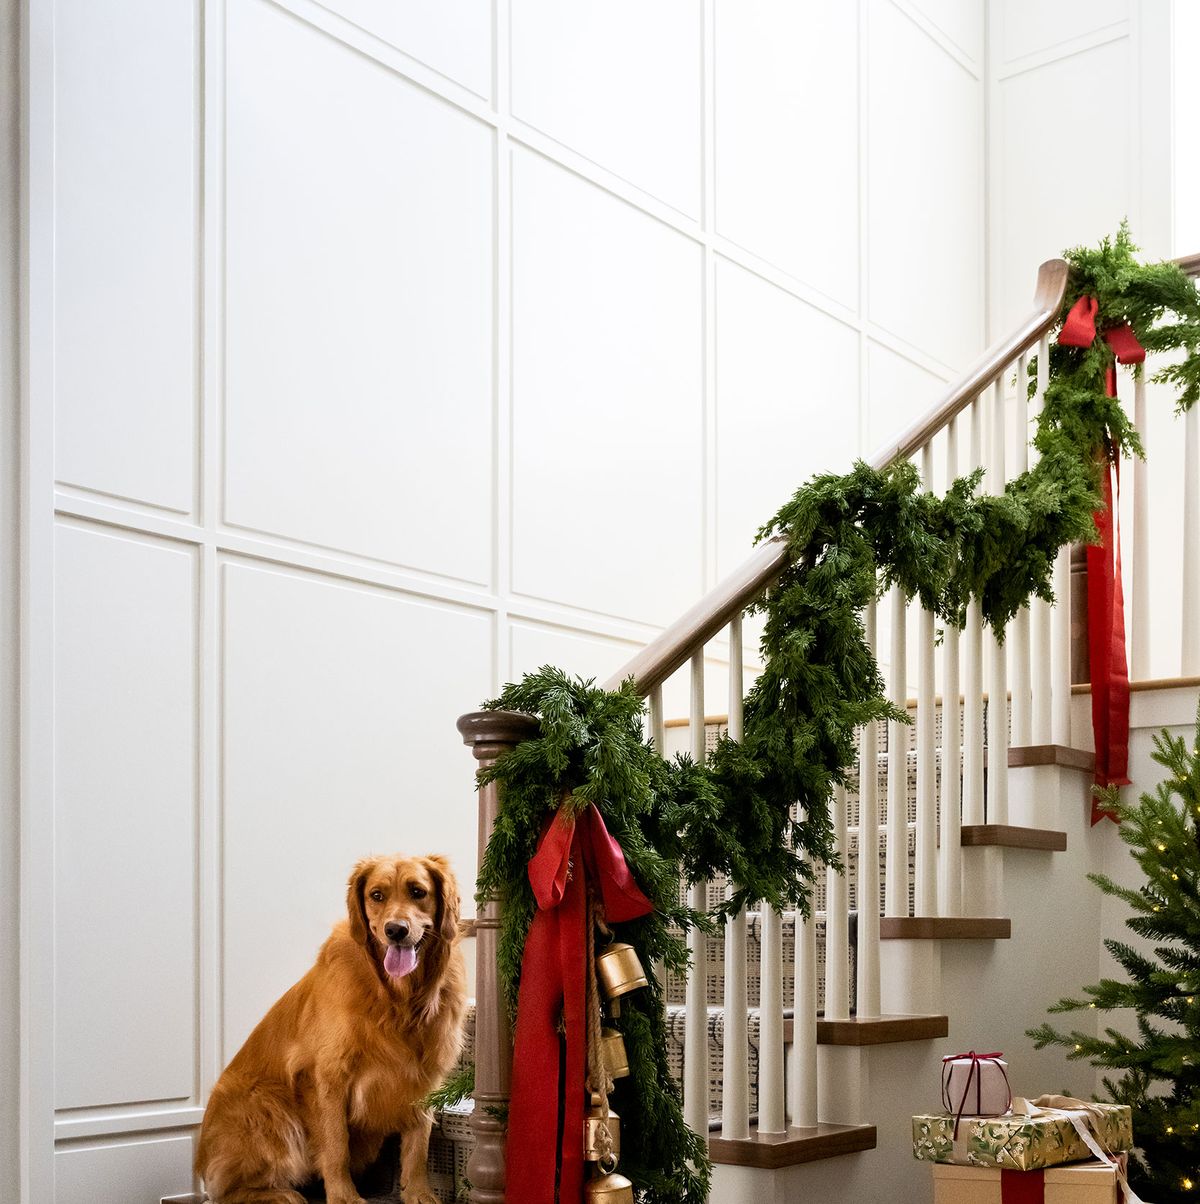 https://hips.hearstapps.com/hmg-prod/images/christmas-stair-decor-studio-mcgee-shea-mcgee-lucy-call-holiday2022-146-652e9f2947b49.jpg?crop=1.00xw:0.669xh;0,0.244xh&resize=1200:*